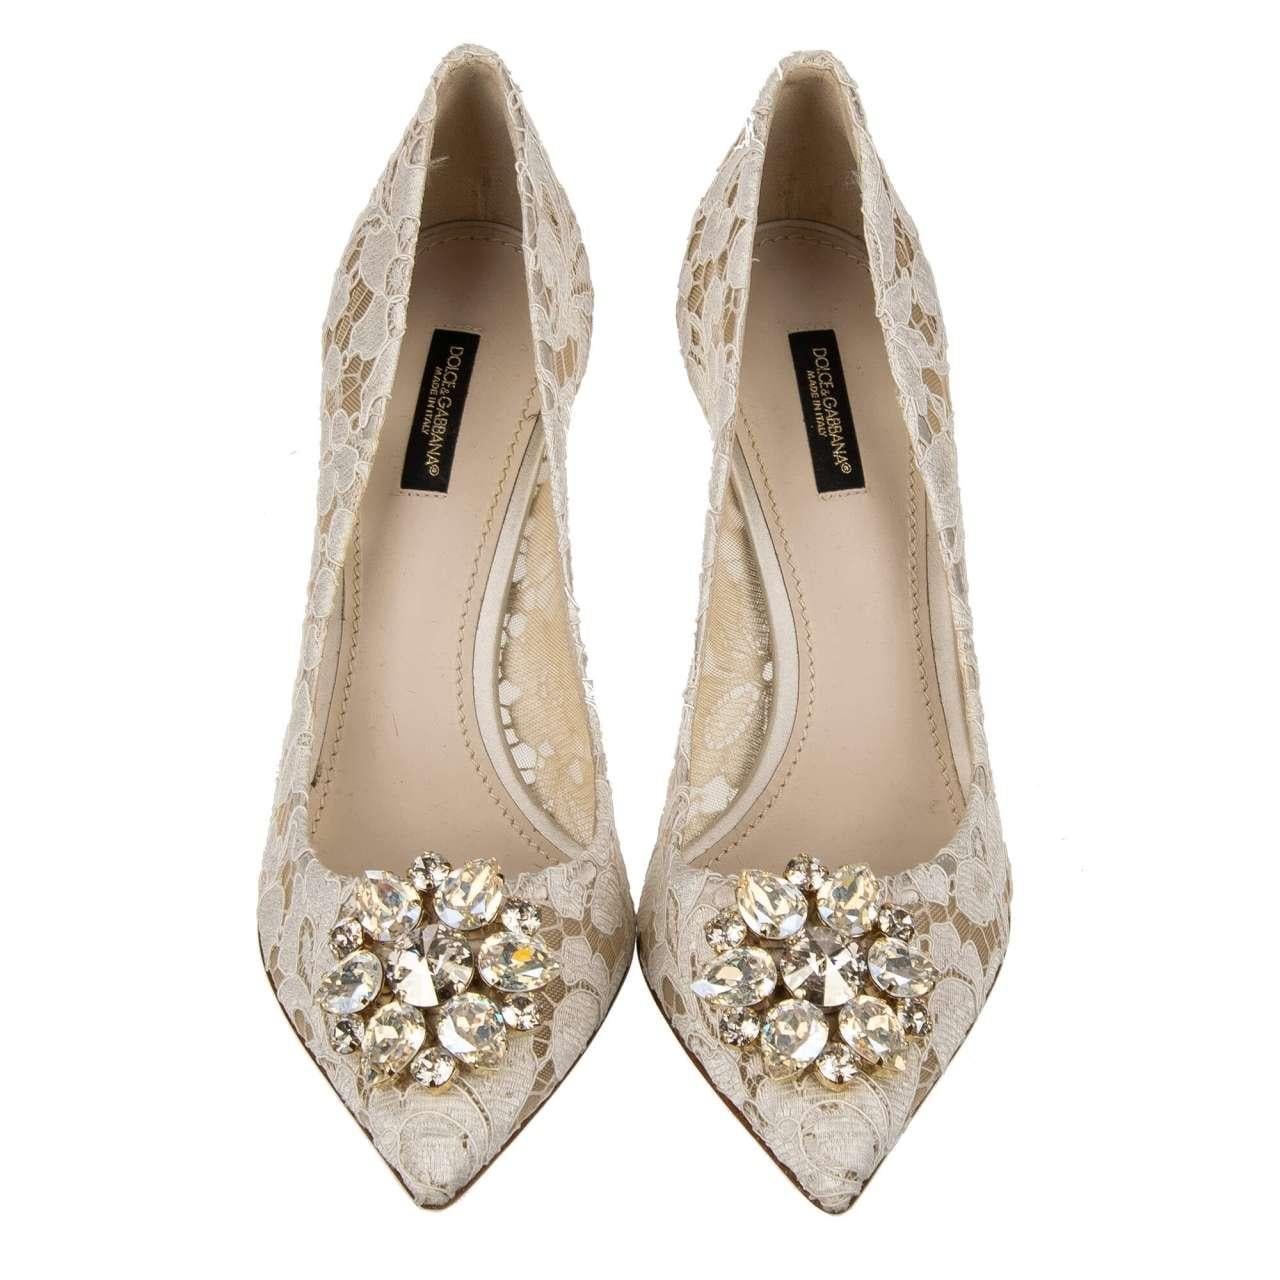 Dolce & Gabbana Taormina Lace Pumps BELLUCCI with Crystal Brooch Beige EUR 39 In Excellent Condition For Sale In Erkrath, DE